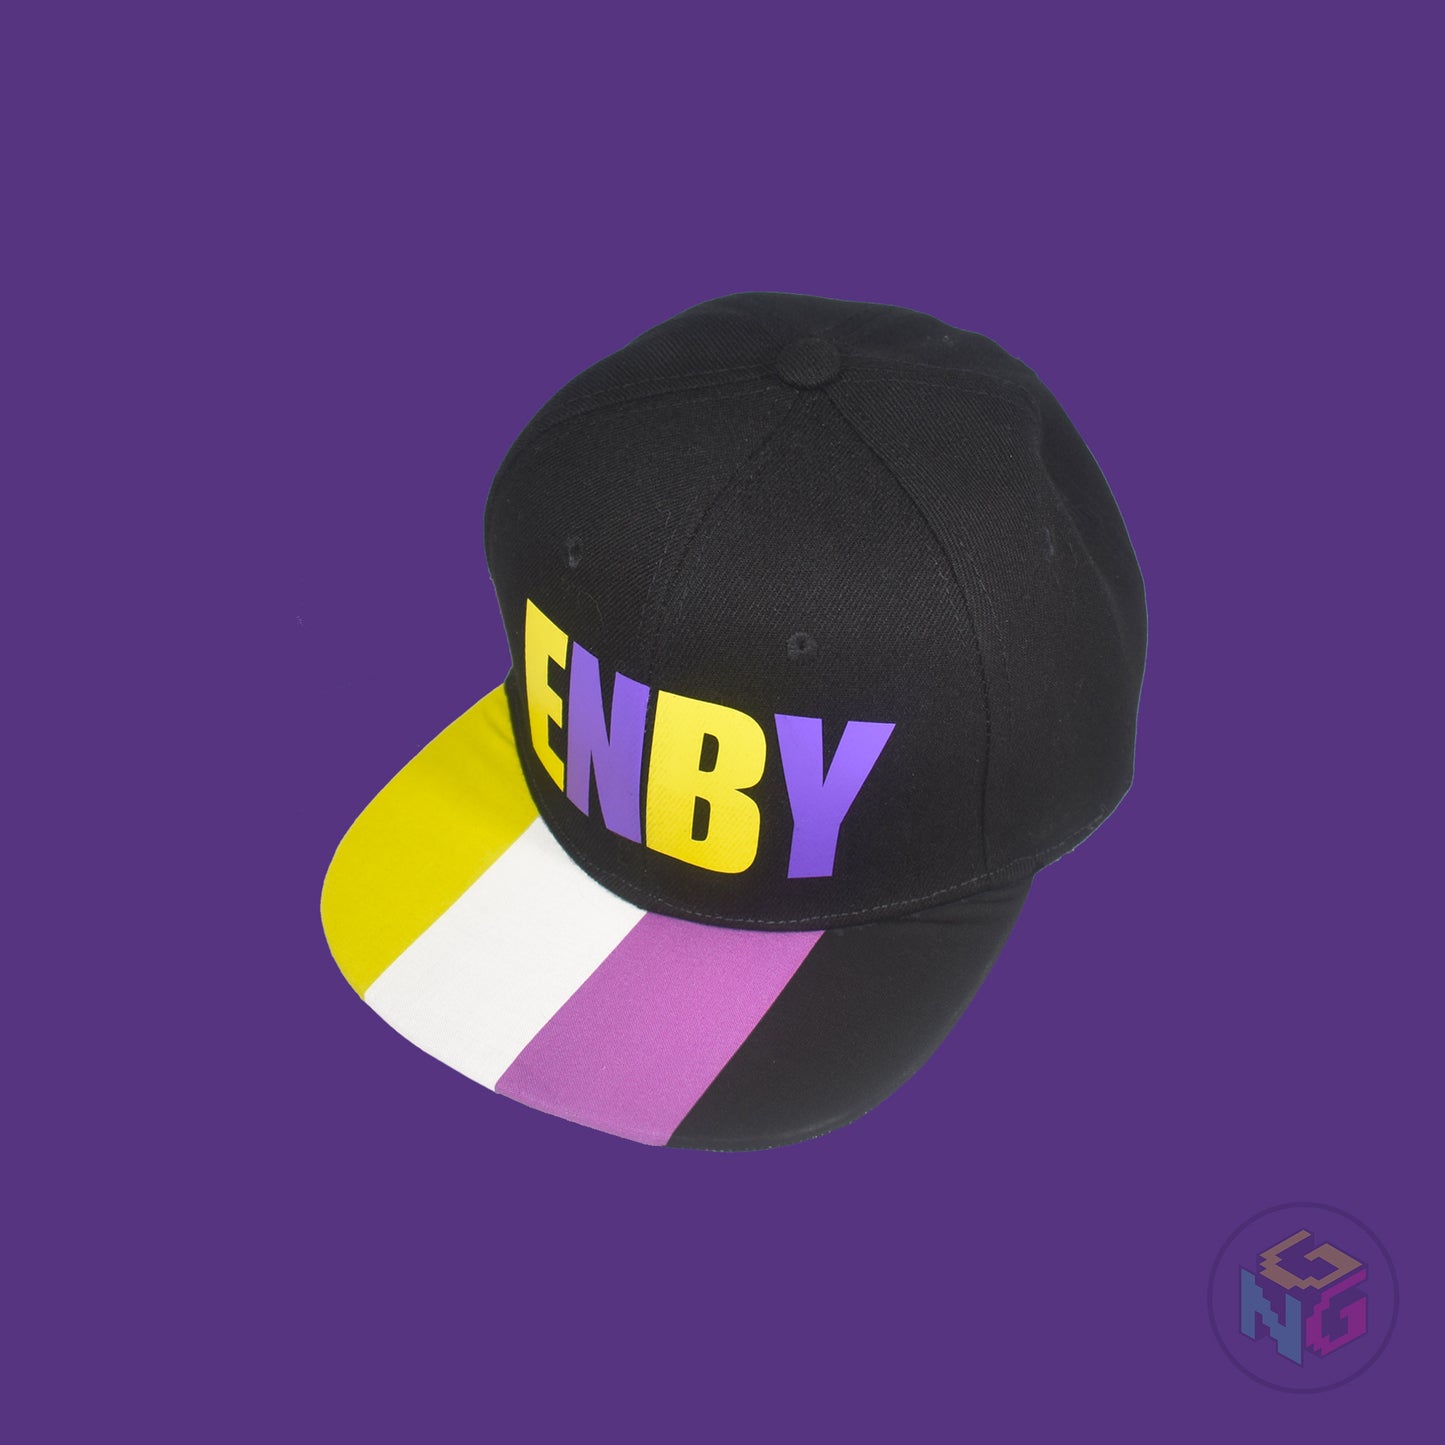 Black flat bill snapback hat. The brim has the nonbinary pride flag on both sides and the front of the hat has the word “ENBY” in yellow and purple letters. Front left view